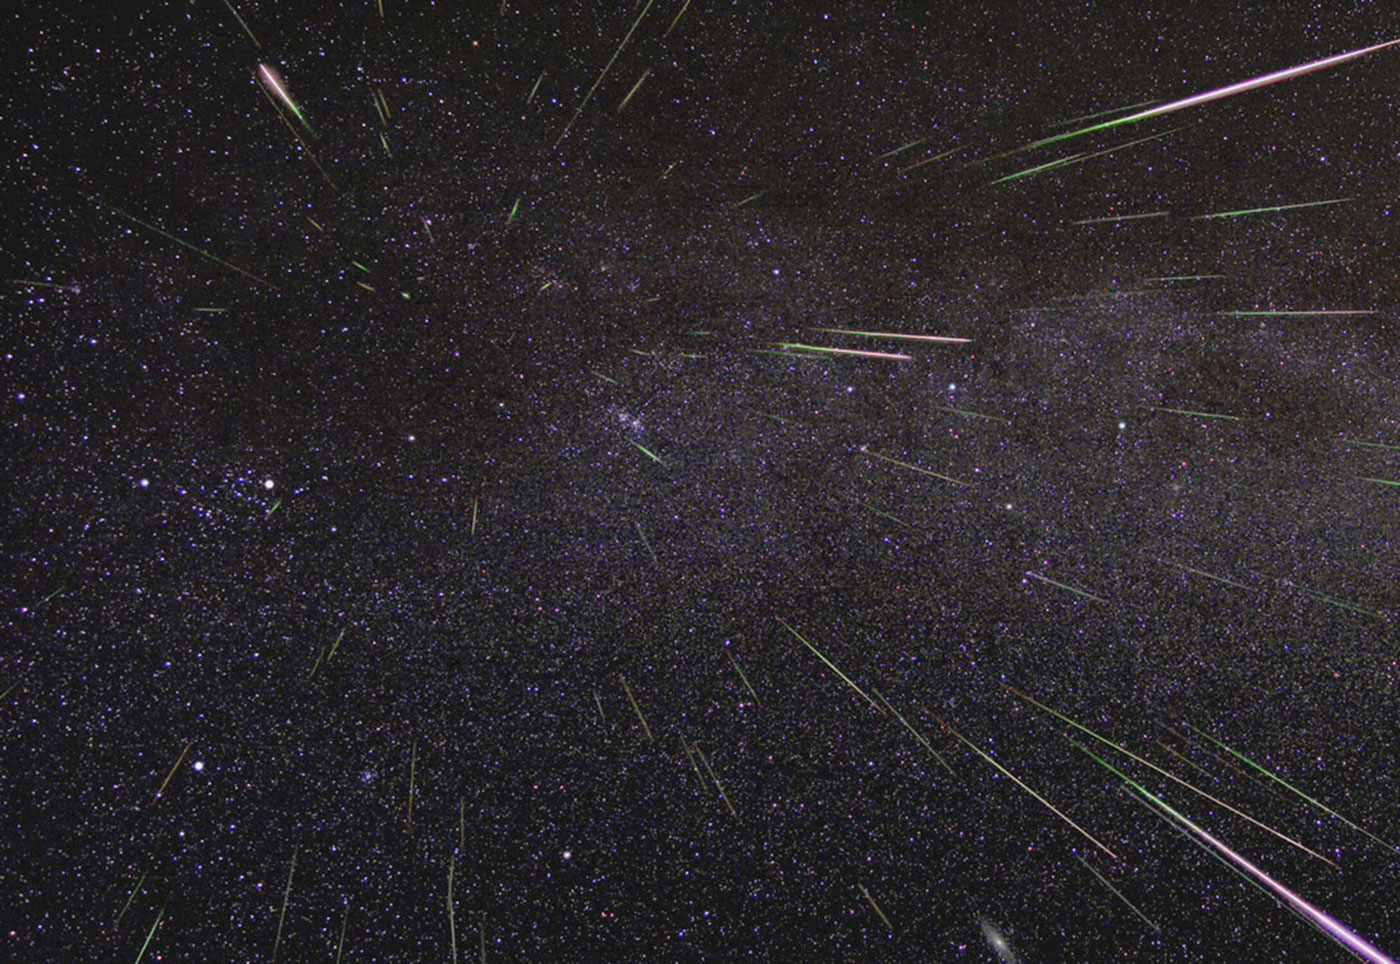 An outburst of Perseid meteors lights up the sky in August 2009 in this time-lapse image. Stargazers expect a similar outburst during next week’s Perseid meteor shower, which will be visible overnight on Aug. 11 and 12.